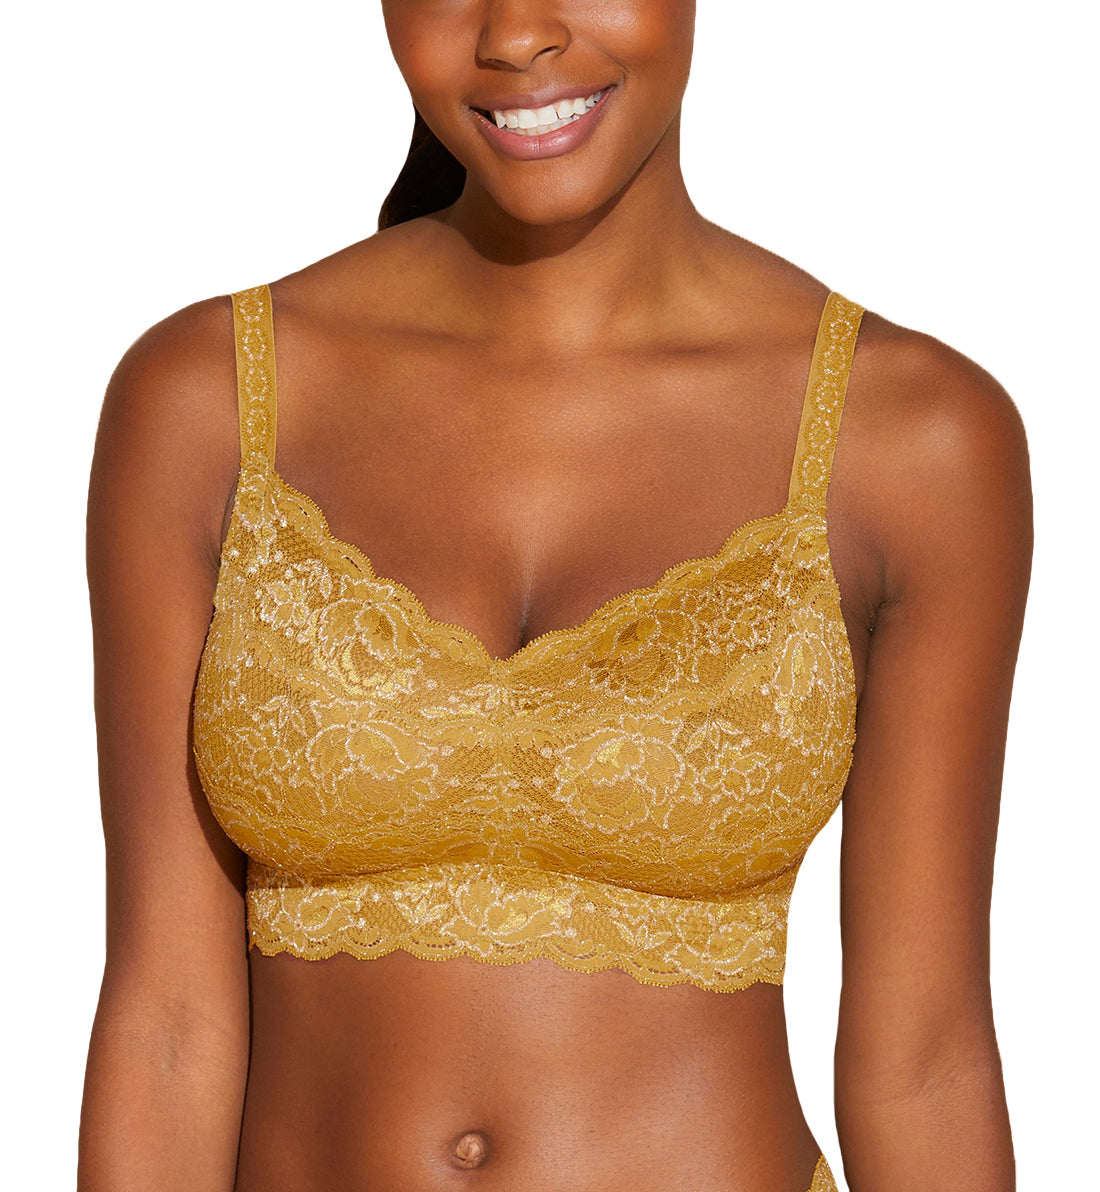 Cosabella NSN Metallics CURVY Sweetie Bralette (NEVME1310),Large,Chartreuse Gold - Chartreuse Gold,Large